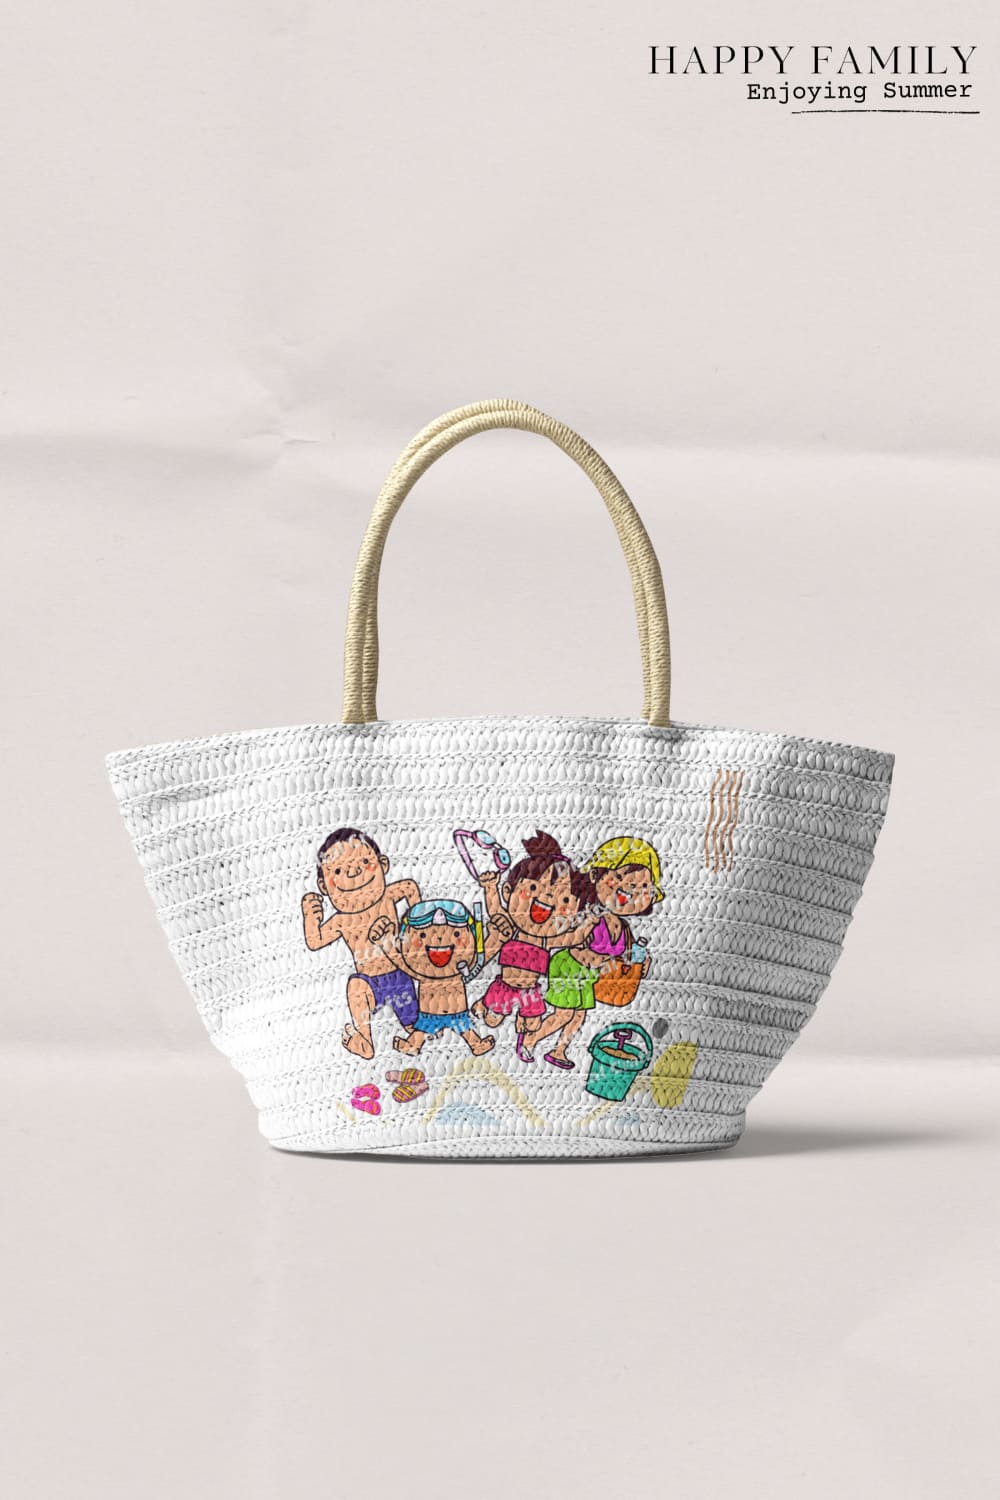 Print happy family enjoying summer on a knitted bag.